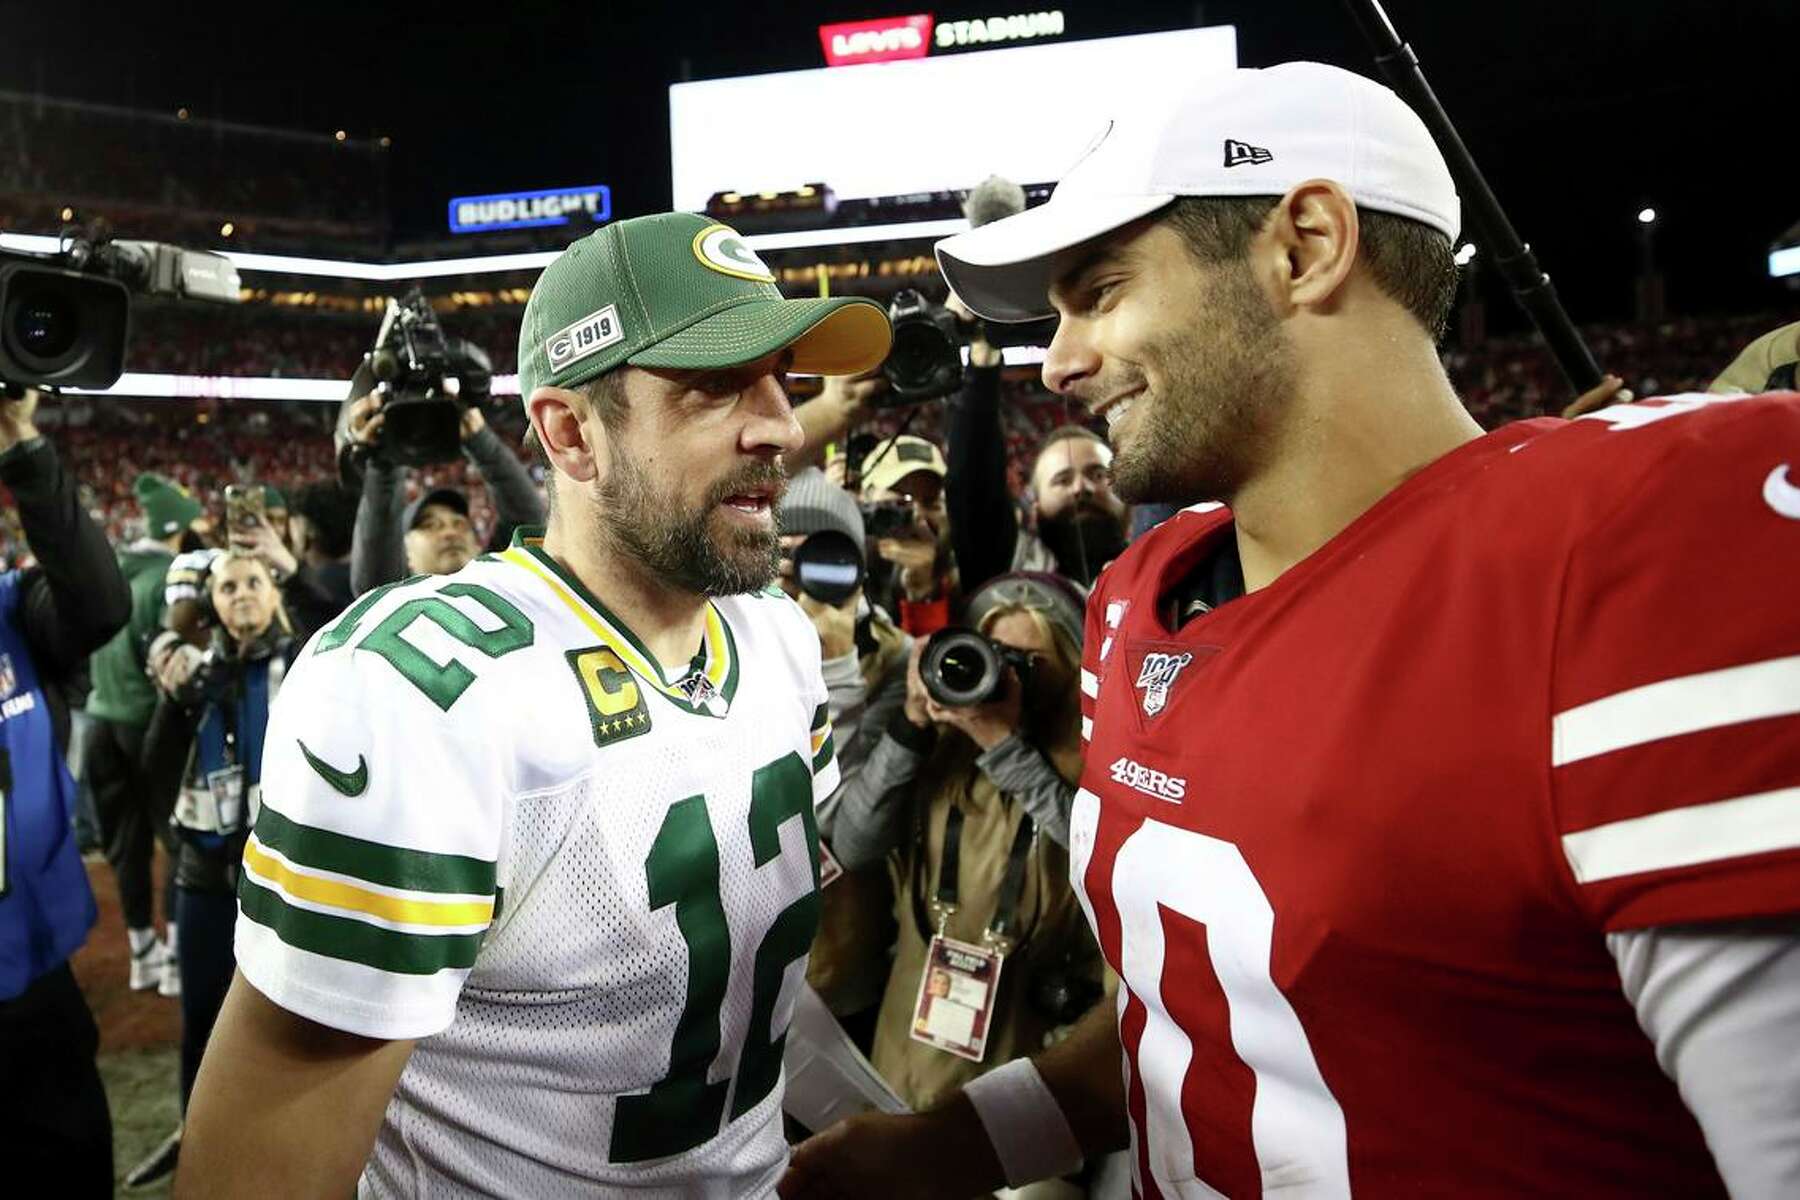 It S 49ers Garoppolo Vs Packers Rodgers On Sunday Lance Vs Love In 22